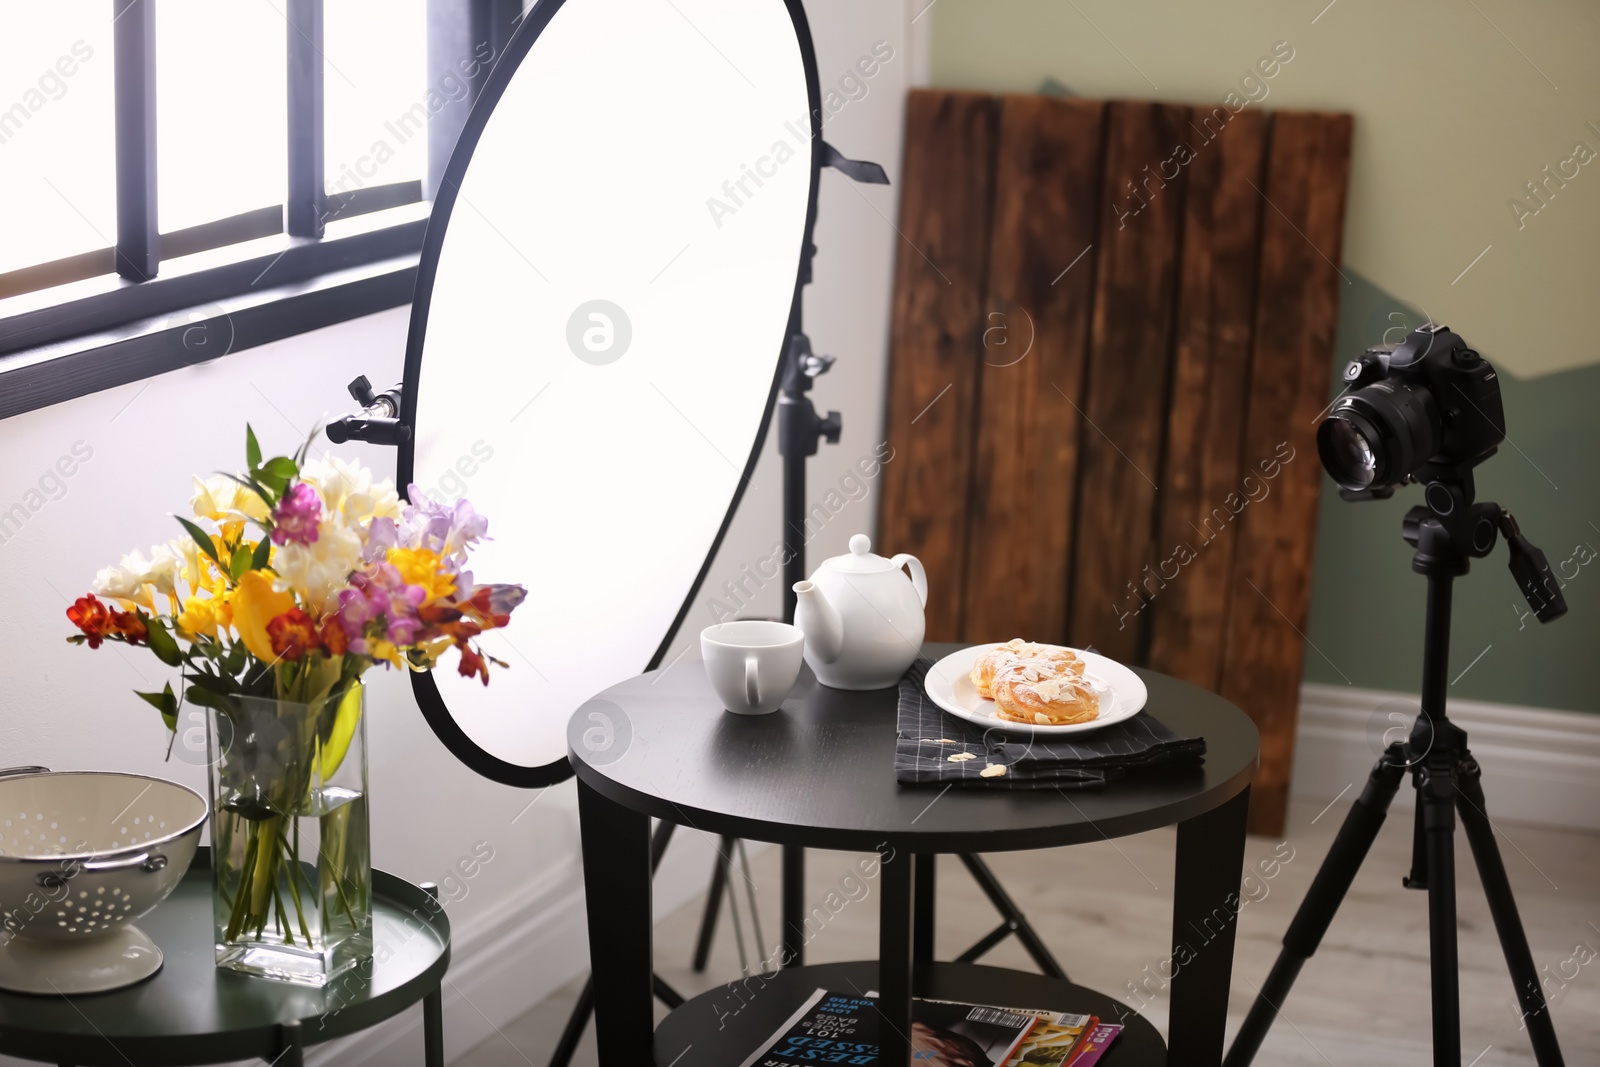 Photo of Professional camera on tripod and food composition in photo studio